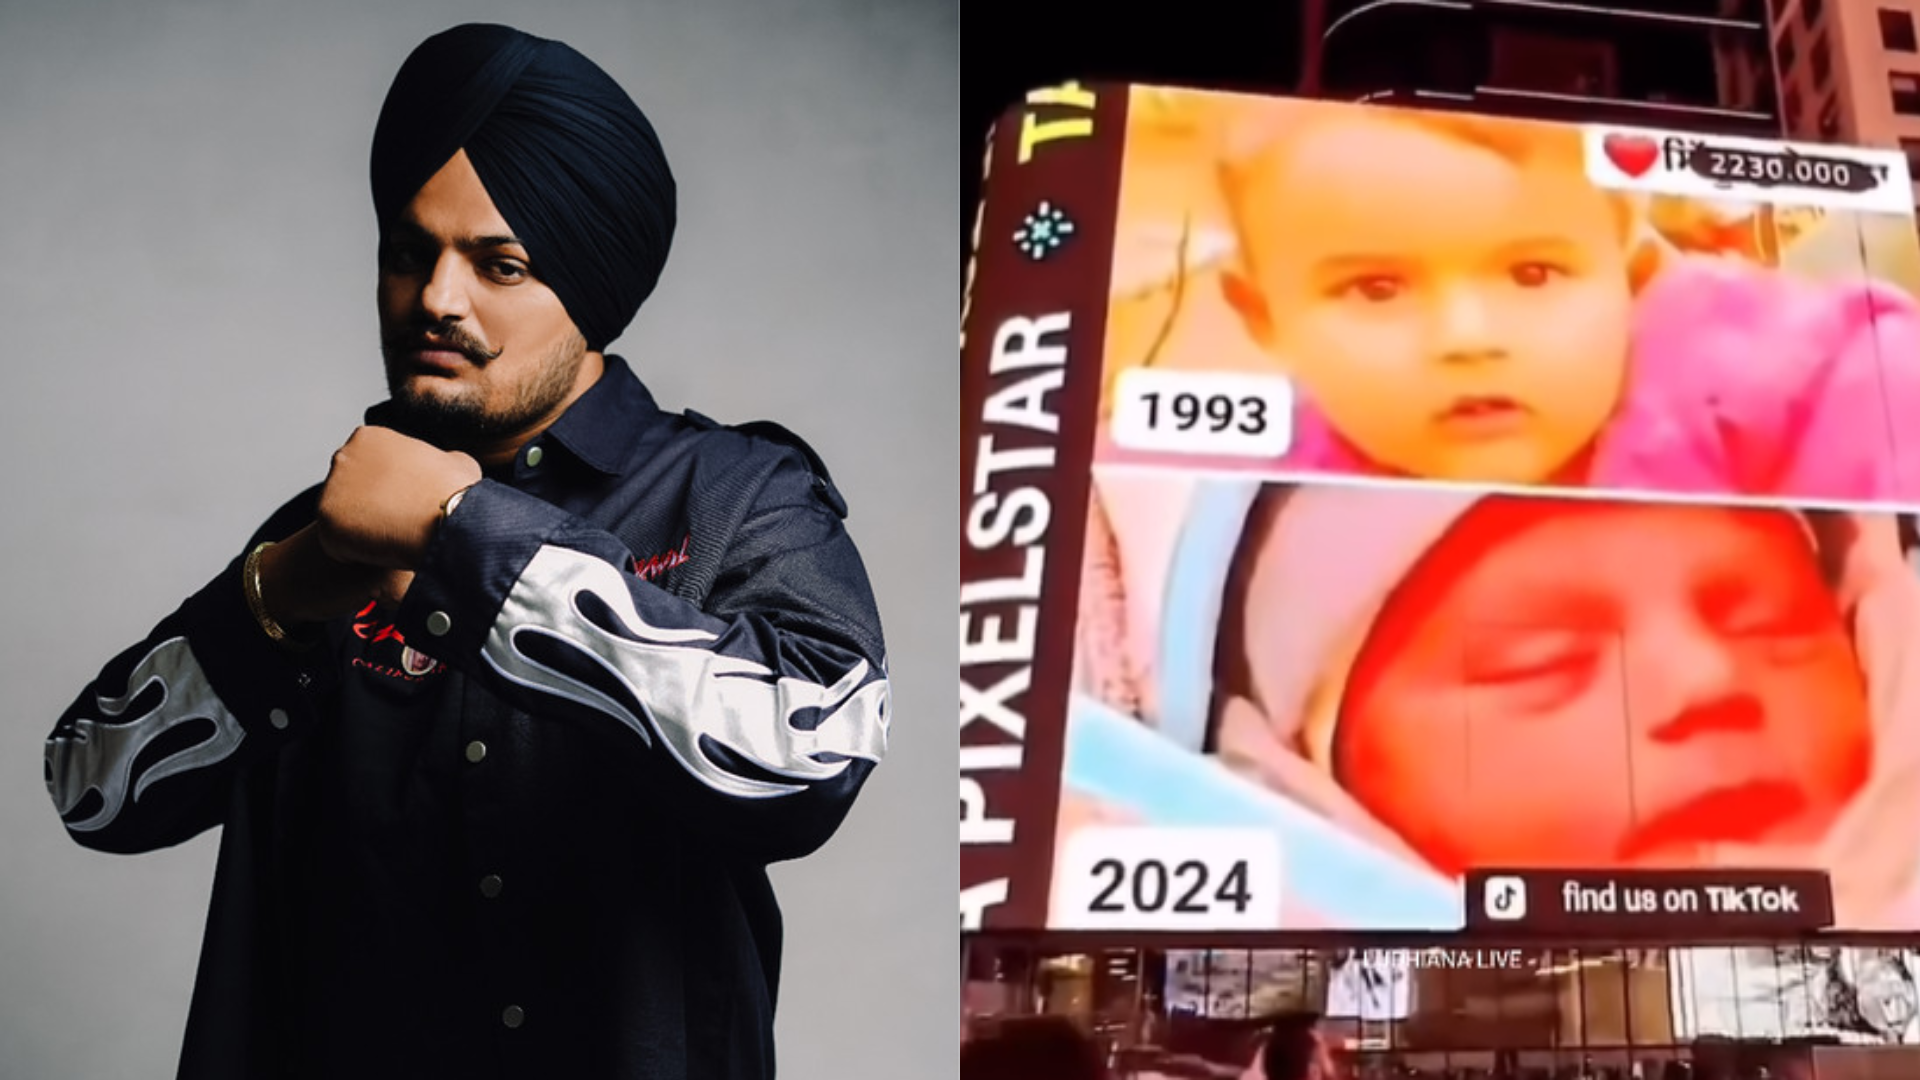 Sidhu Moose Wala’s Father And His Newly Born Baby Brother Gets Featured On The Iconic Times Square Billboard